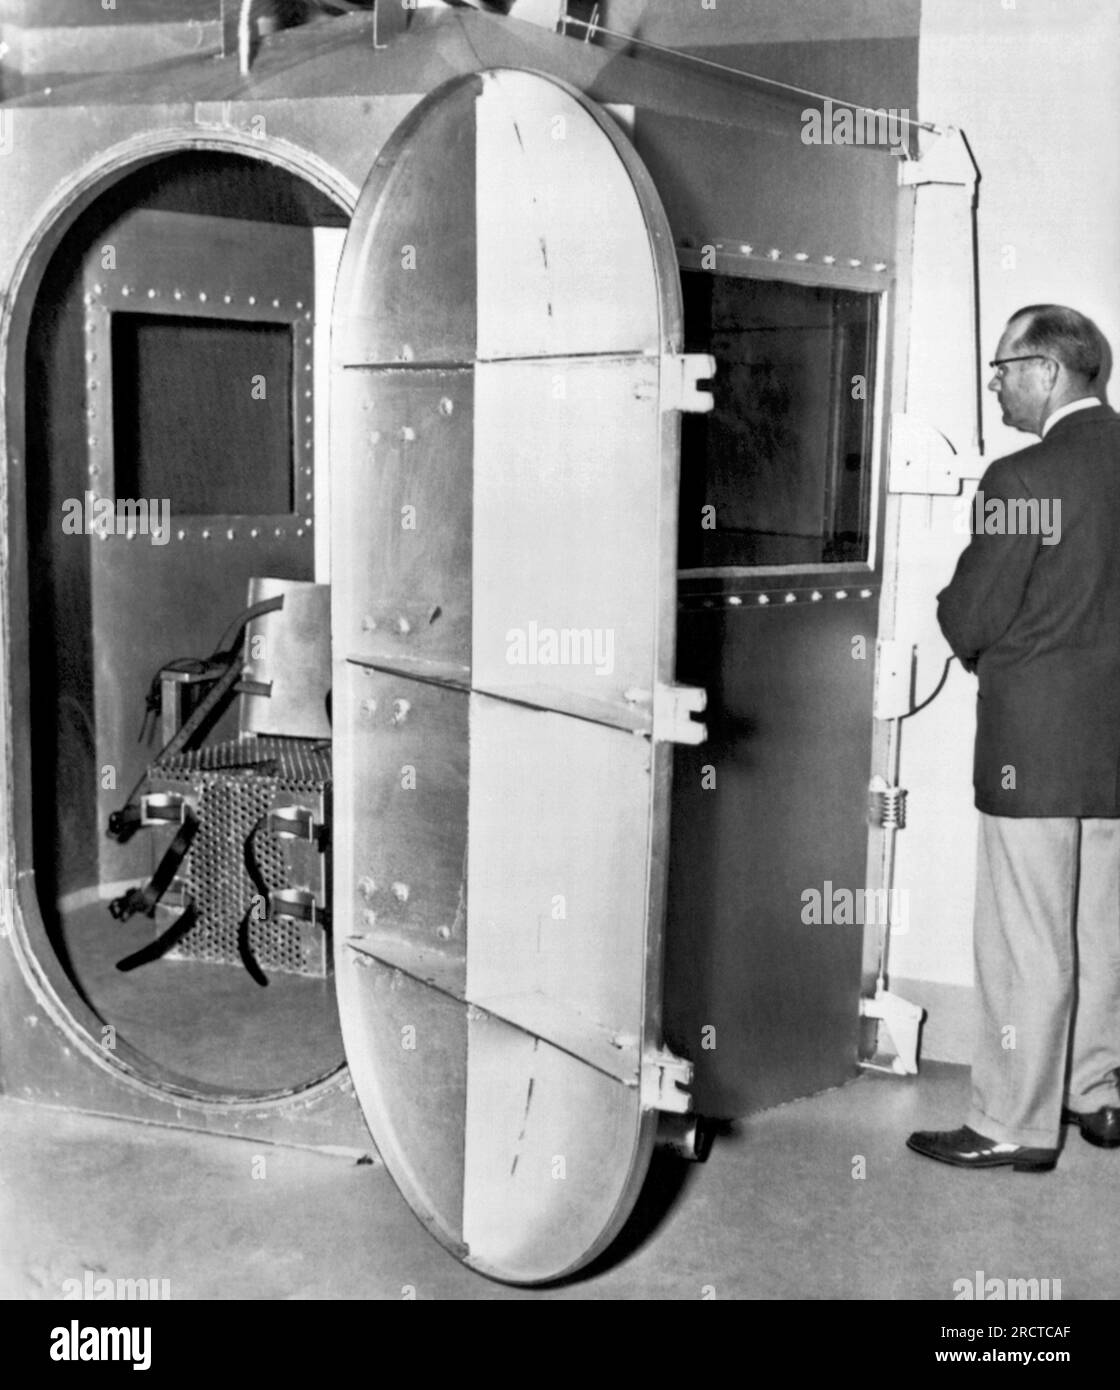 Jefferson City, Missouri: November 20, 1953  Jefferson City Correctional Center Wardon Ralph Eidson poses with his hand on the gas chamber lever he will push to put Carl Austin Hall and Bonnie Brown Heady to death for the kidnapping and murder of six year old Bobby Greenlease. Stock Photo